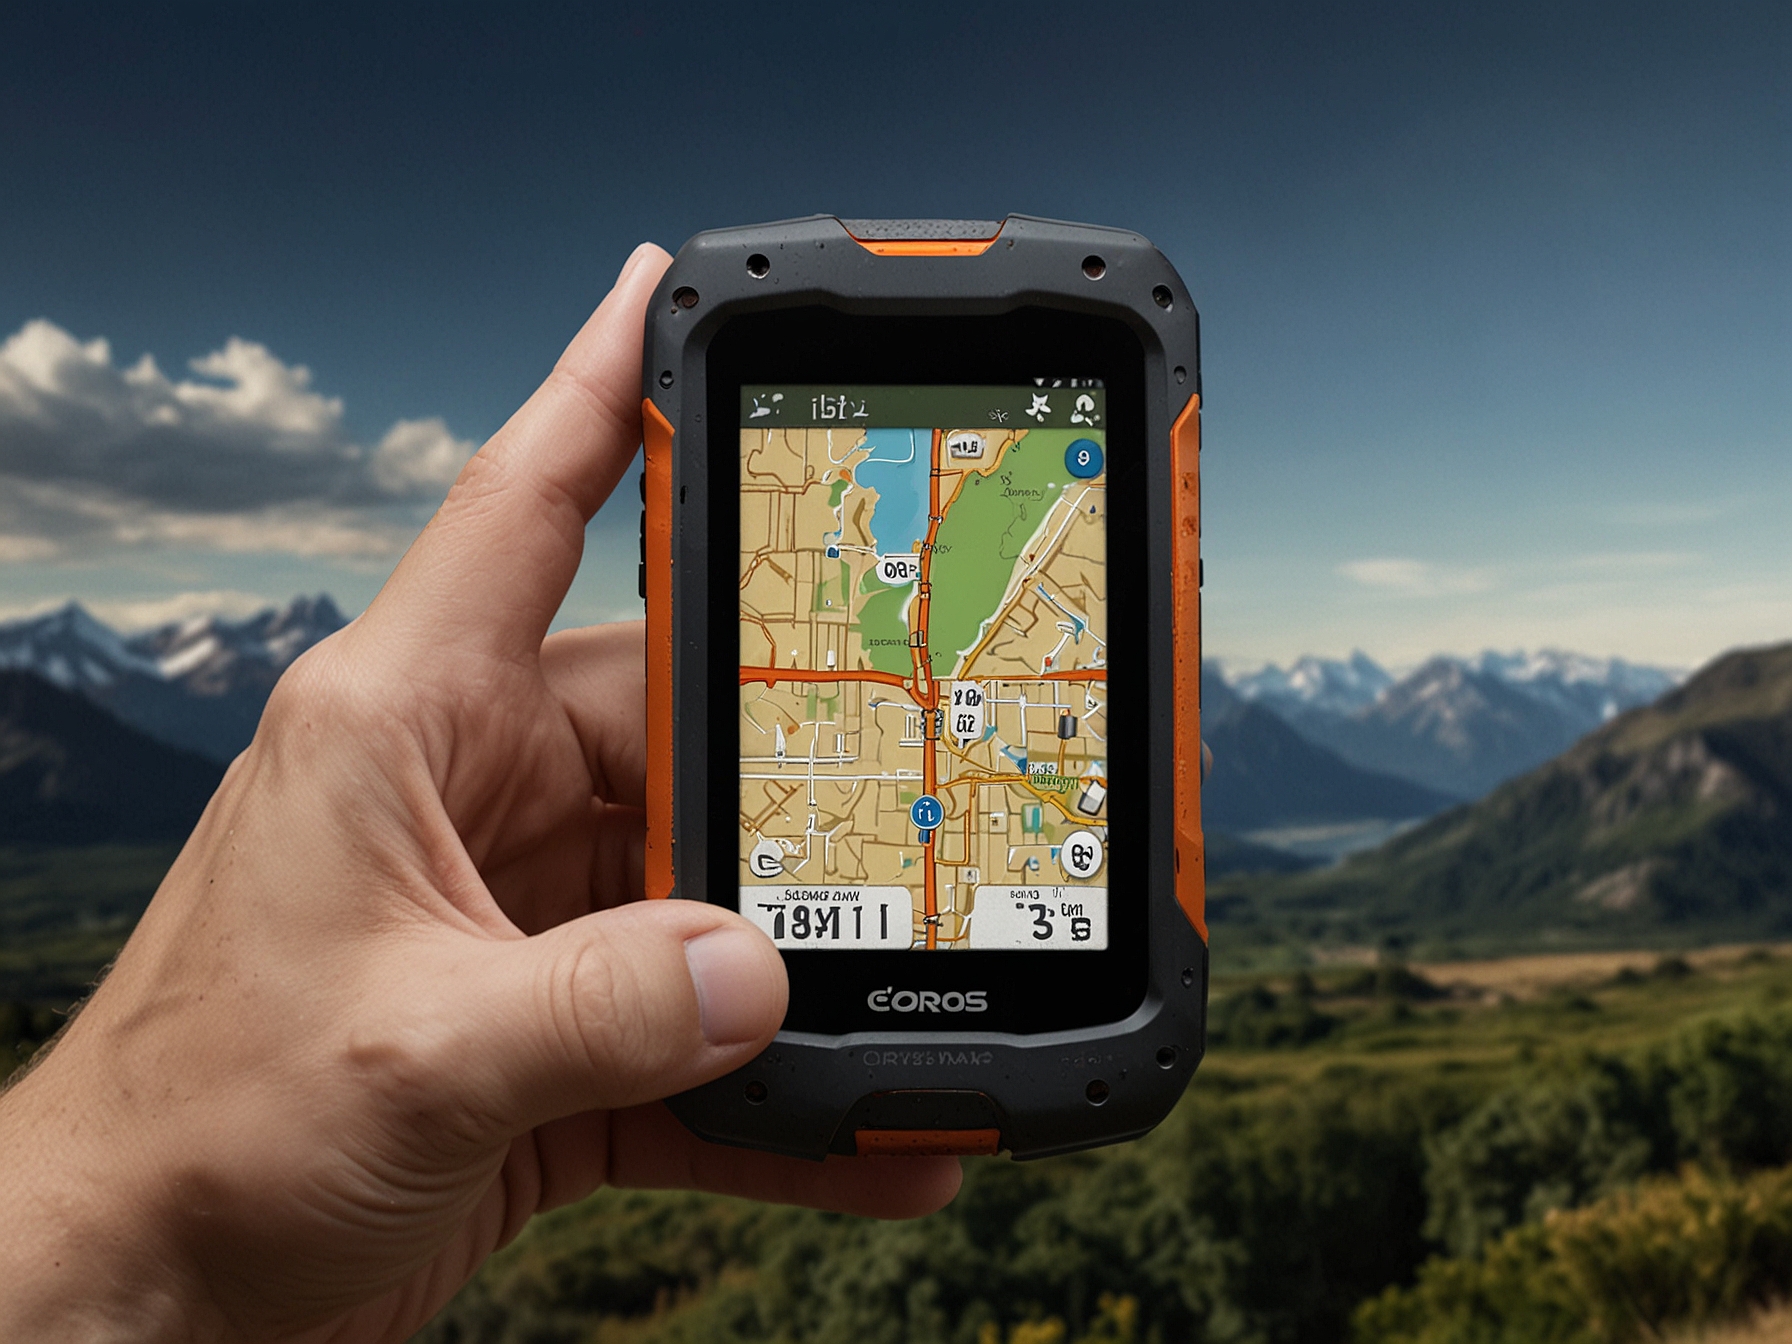 The Coros Dura GPS computer, showcasing its rugged design and durable build, is perfect for adventurers braving challenging environments like rugged mountains or dense forests.